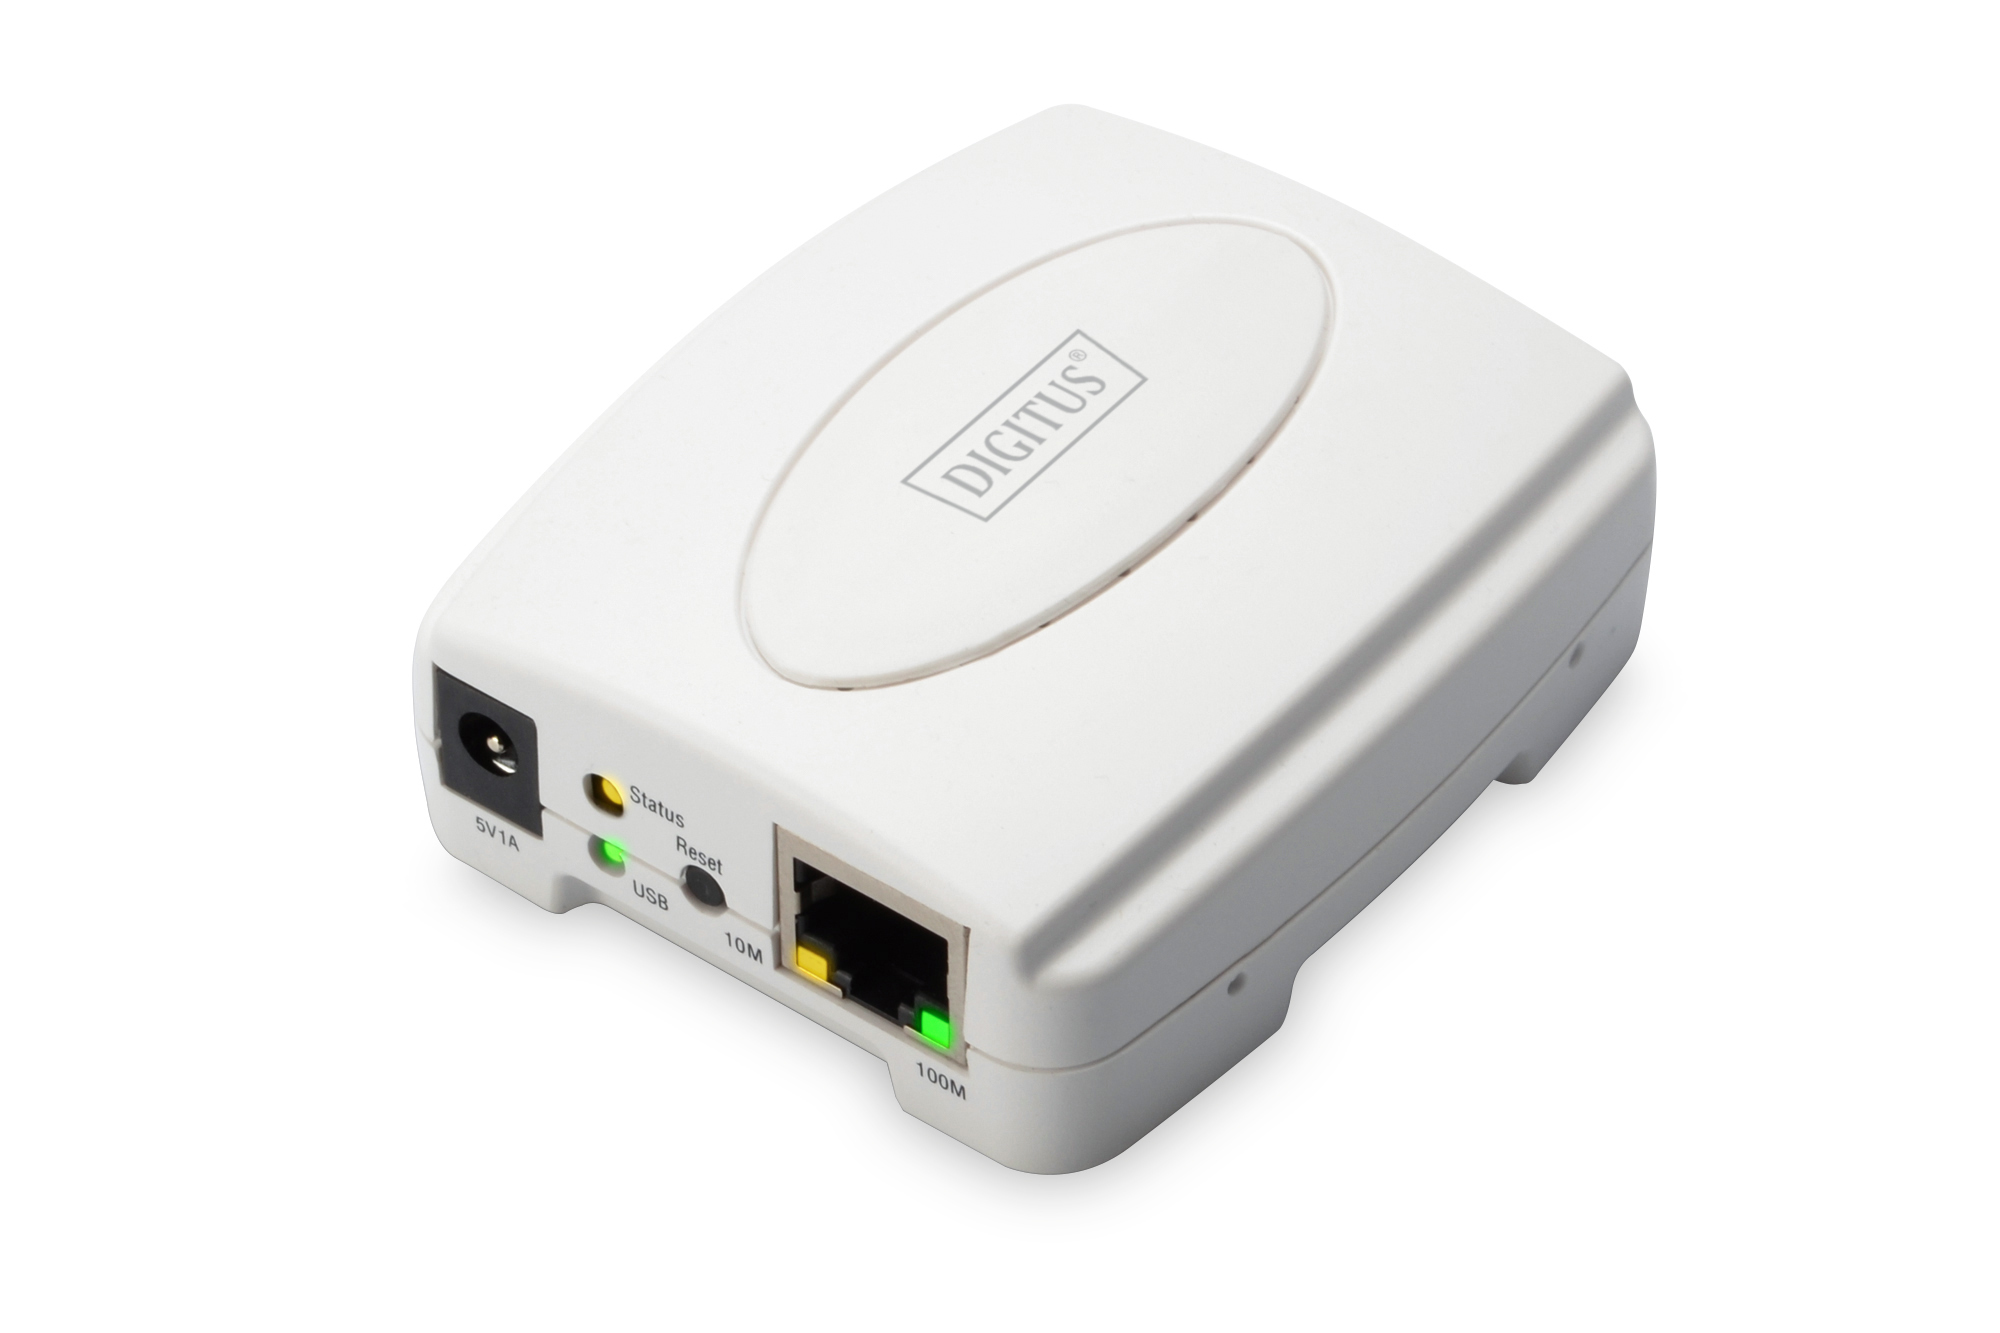 Photos - Other for Computer Digitus Fast Ethernet Print Server, USB 2.0 DN-13003-2 